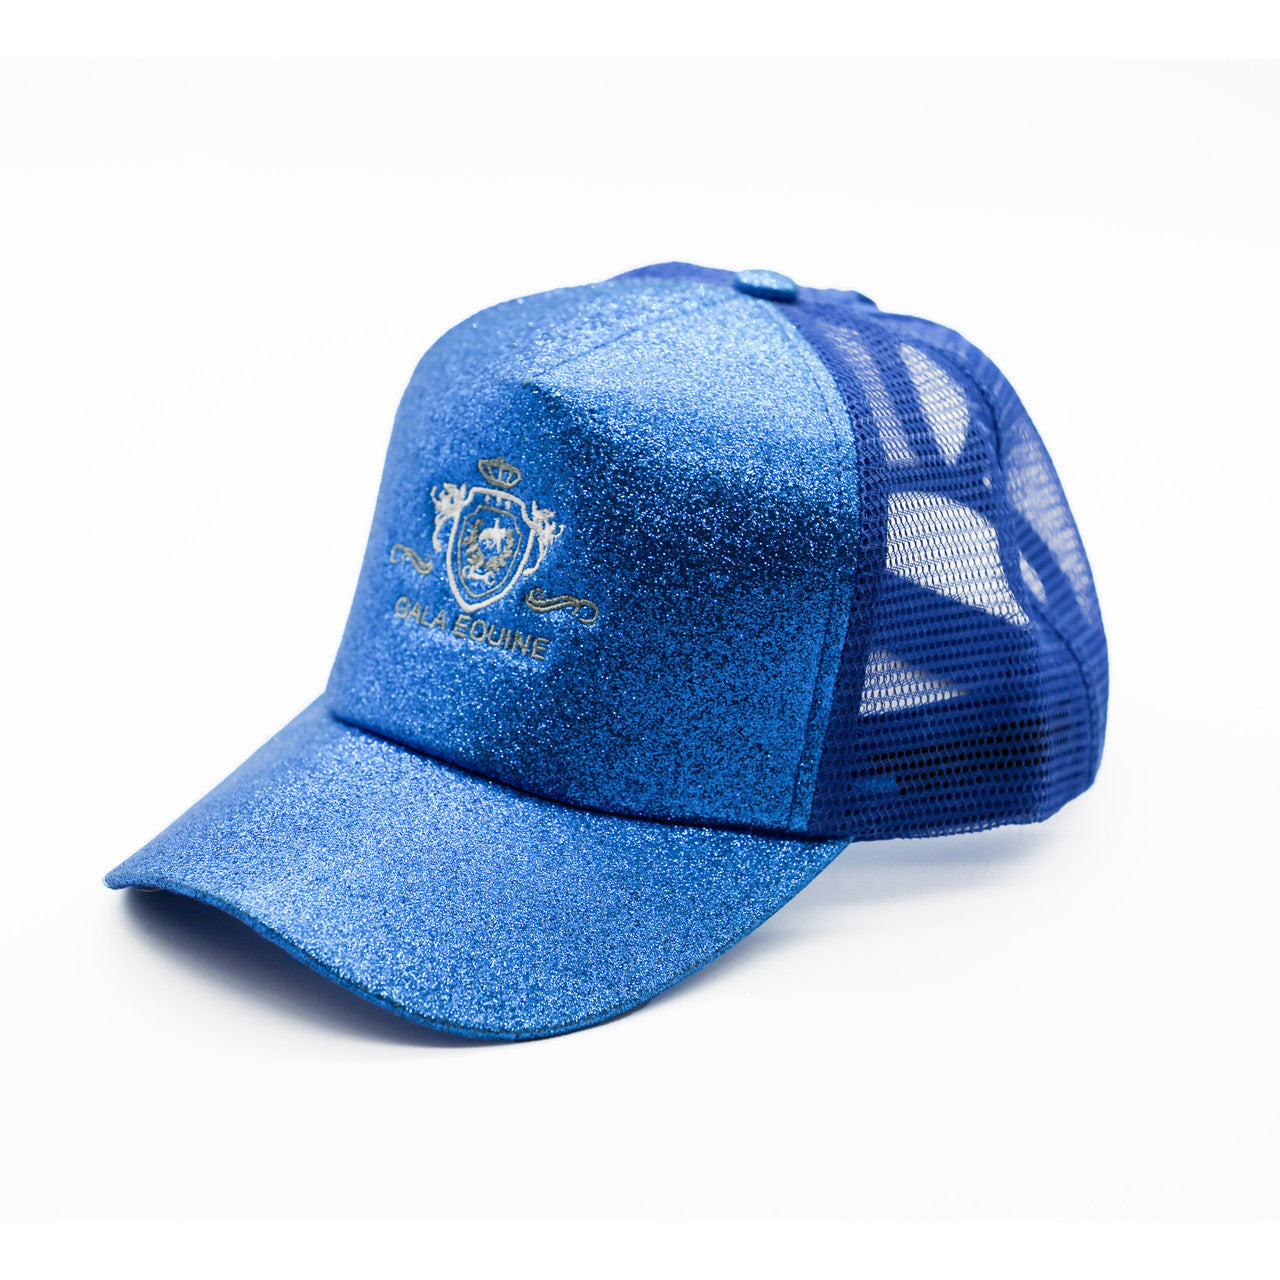 Cap - Glitter Royal Blue with Gold Shield